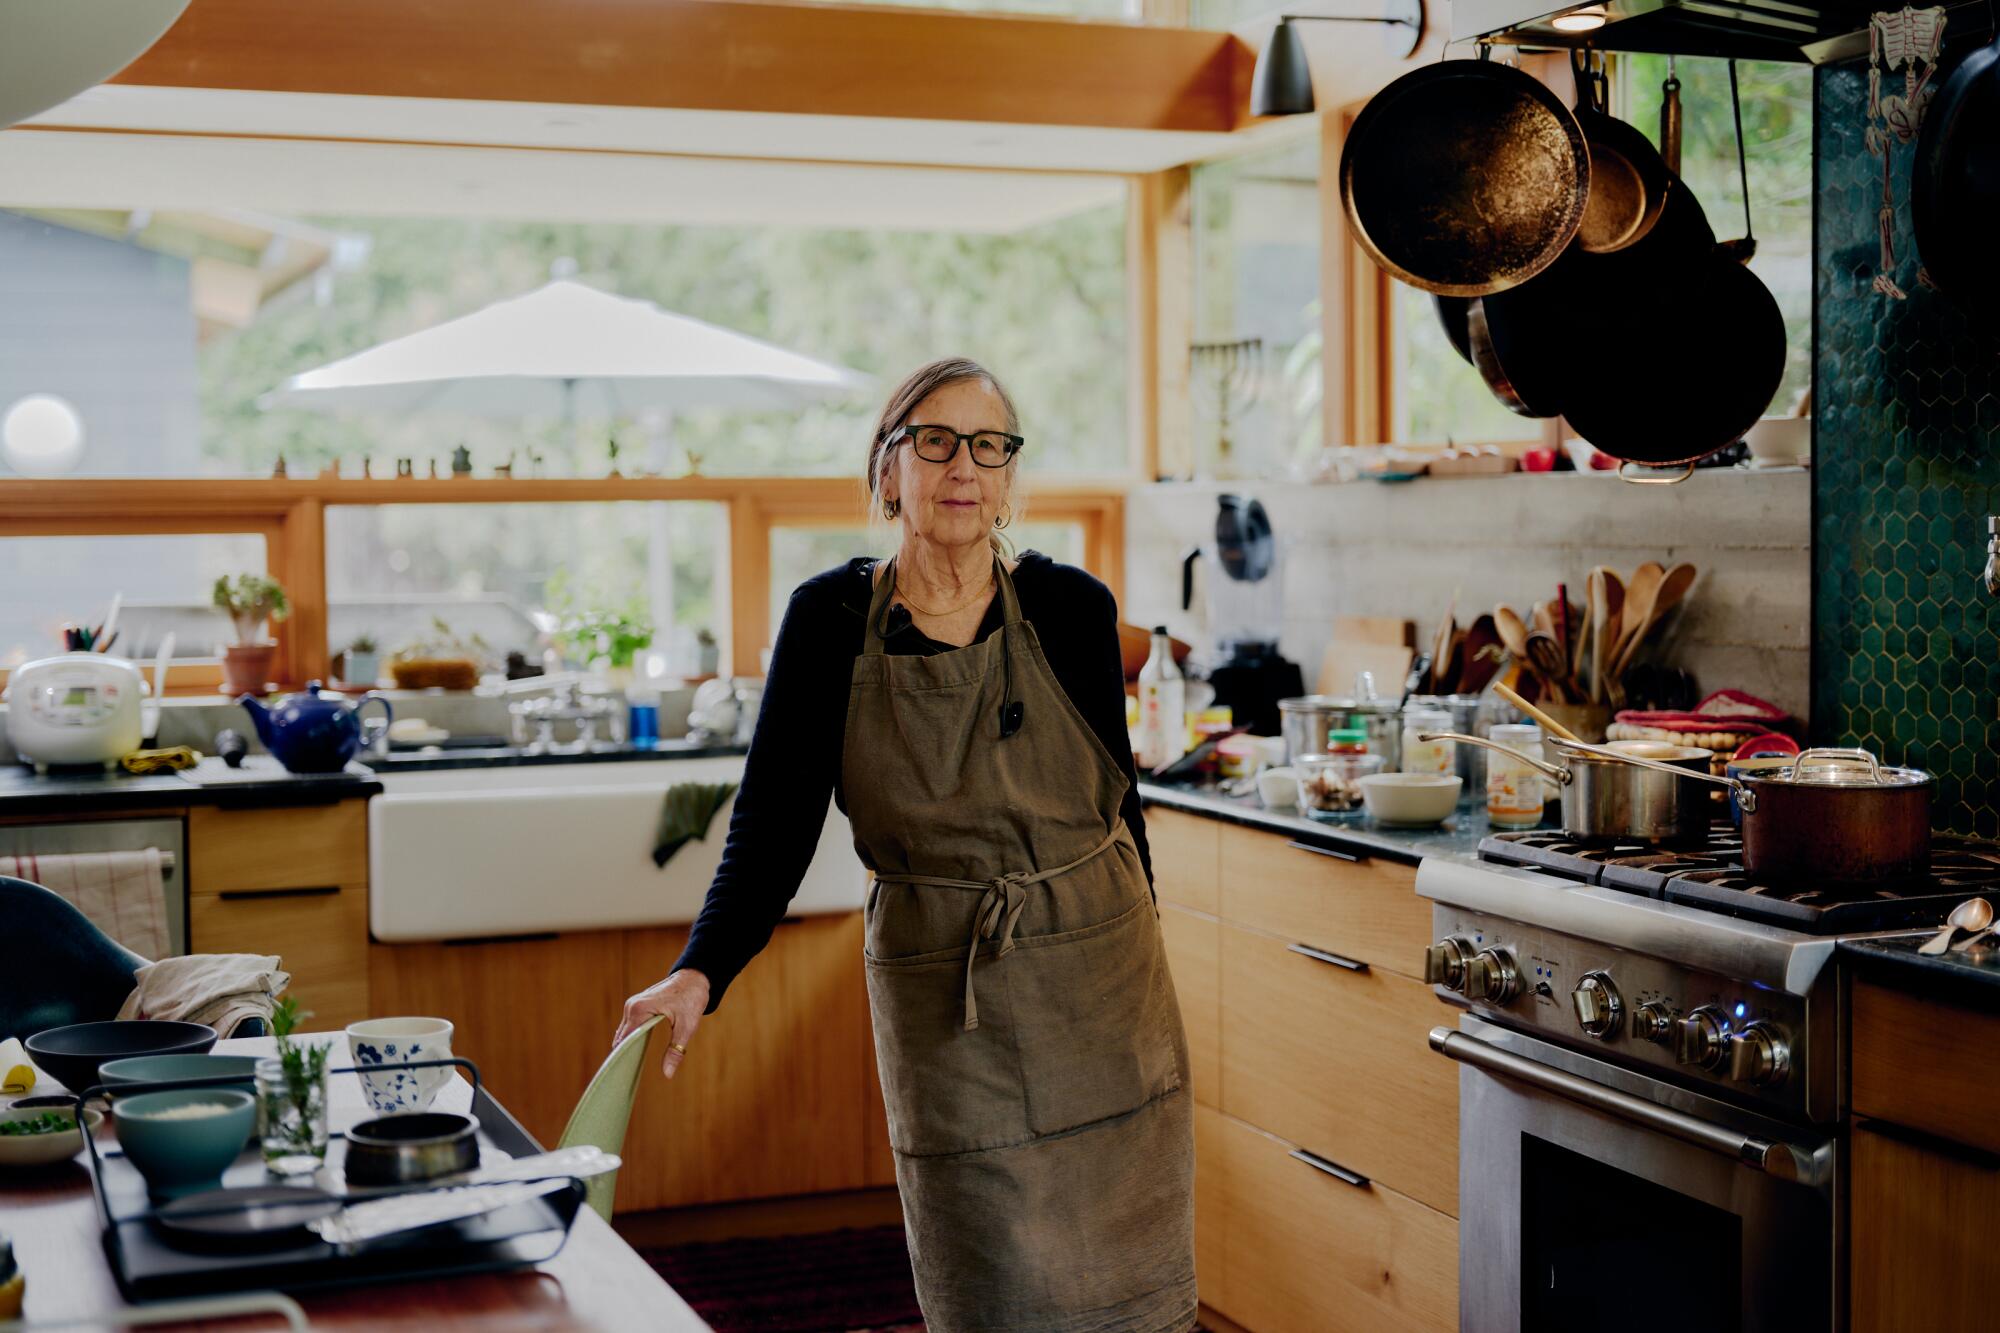 A woman stands in her home kitchen